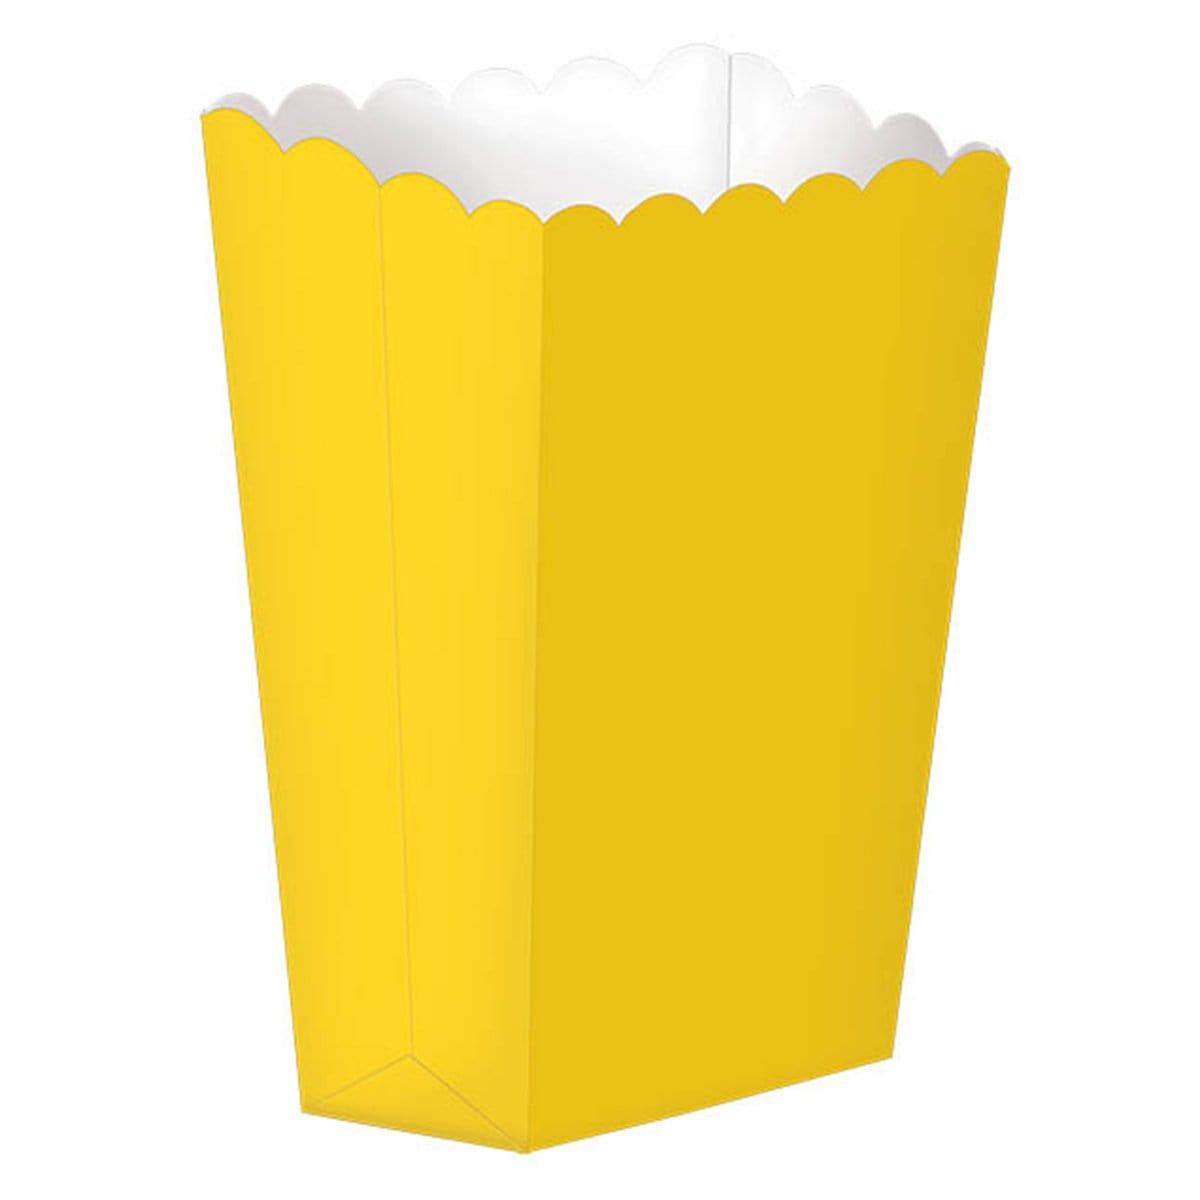 Buy Party Supplies Popcorn Box - Sunshine Yellow 5/pkg sold at Party Expert